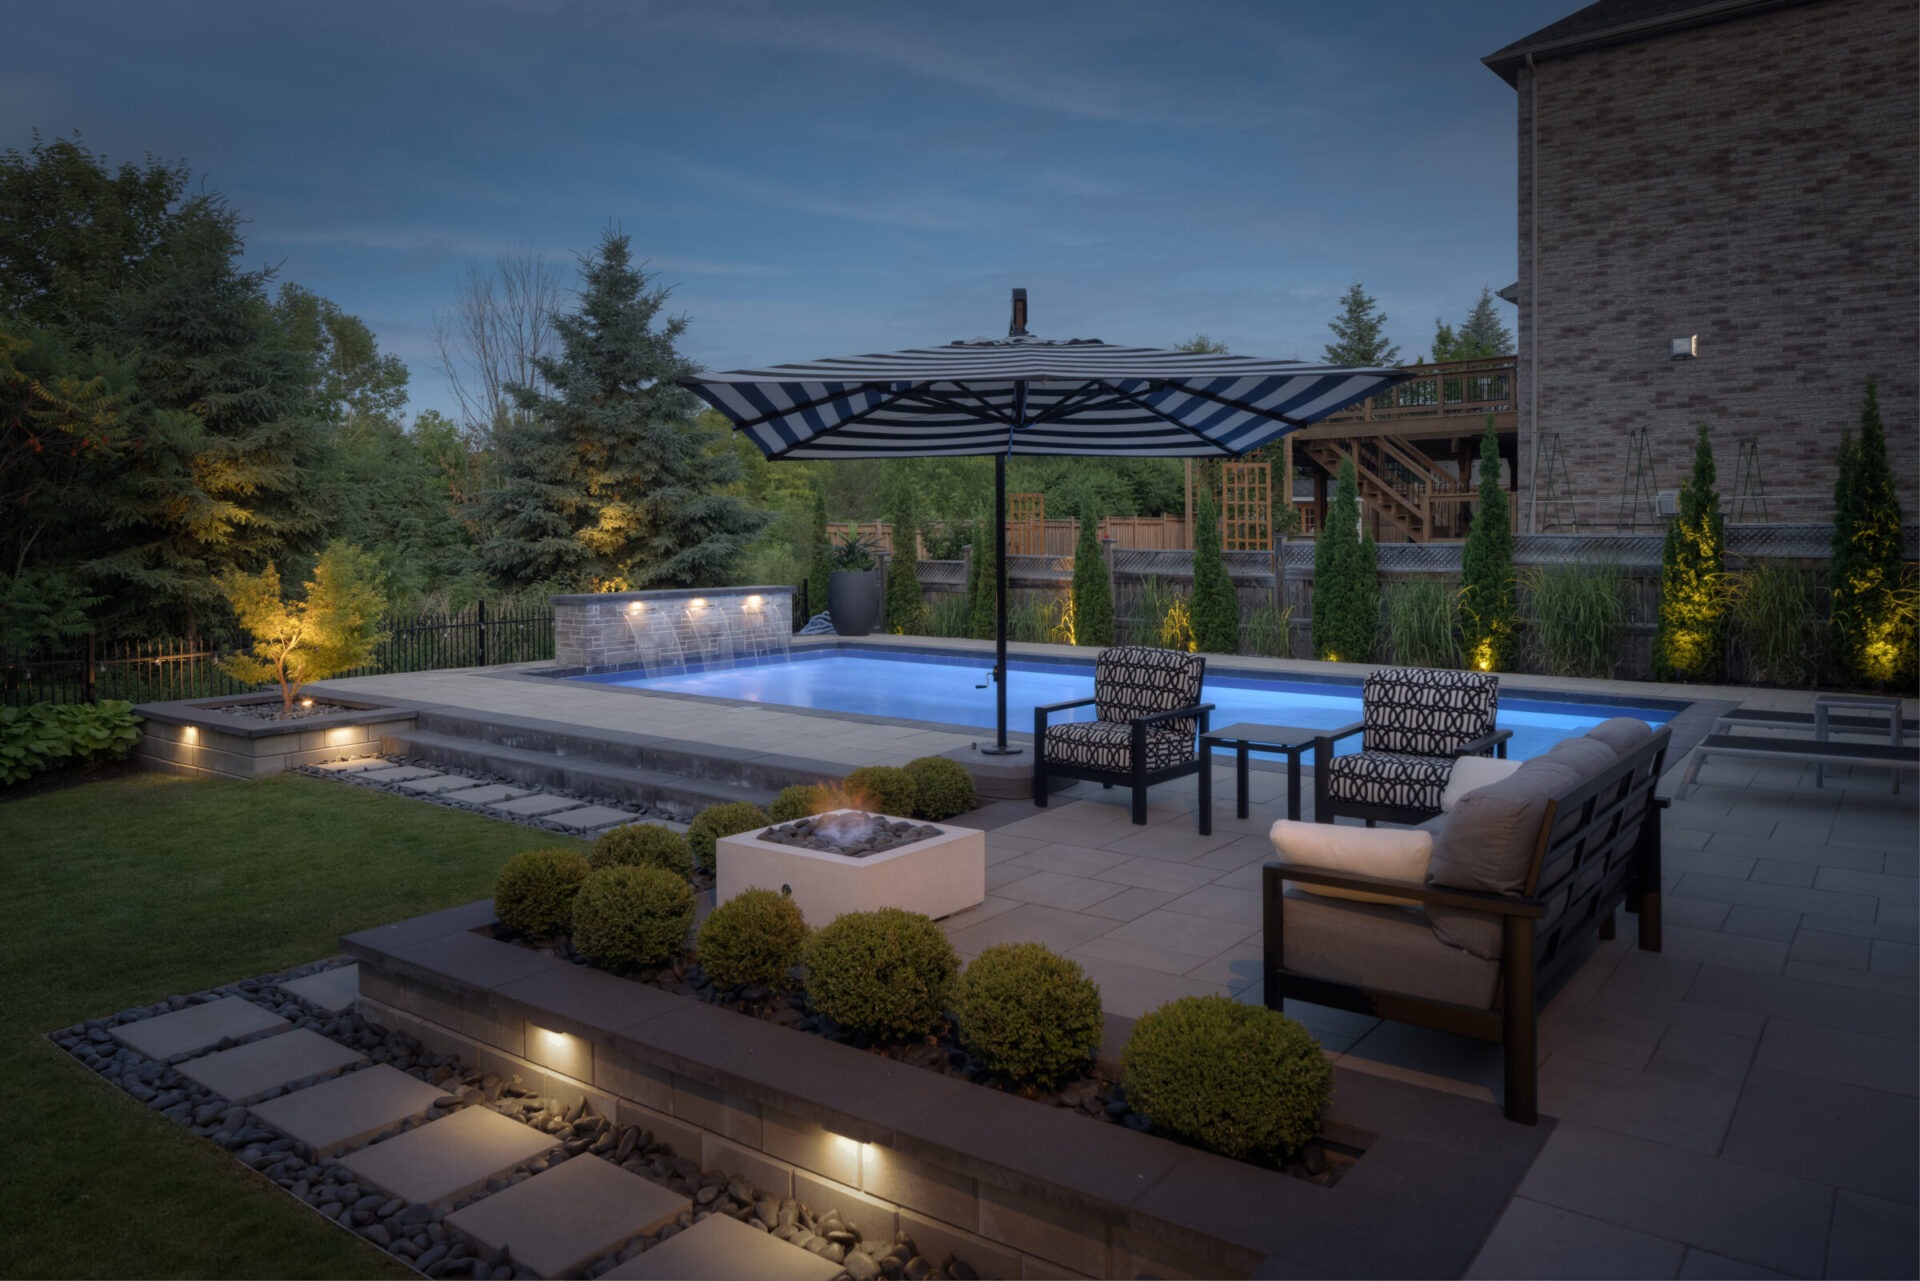 A tranquil evening setting featuring an illuminated swimming pool, elegantly patterned outdoor furniture, lush landscaping, and a stone fireplace in a residential backyard.